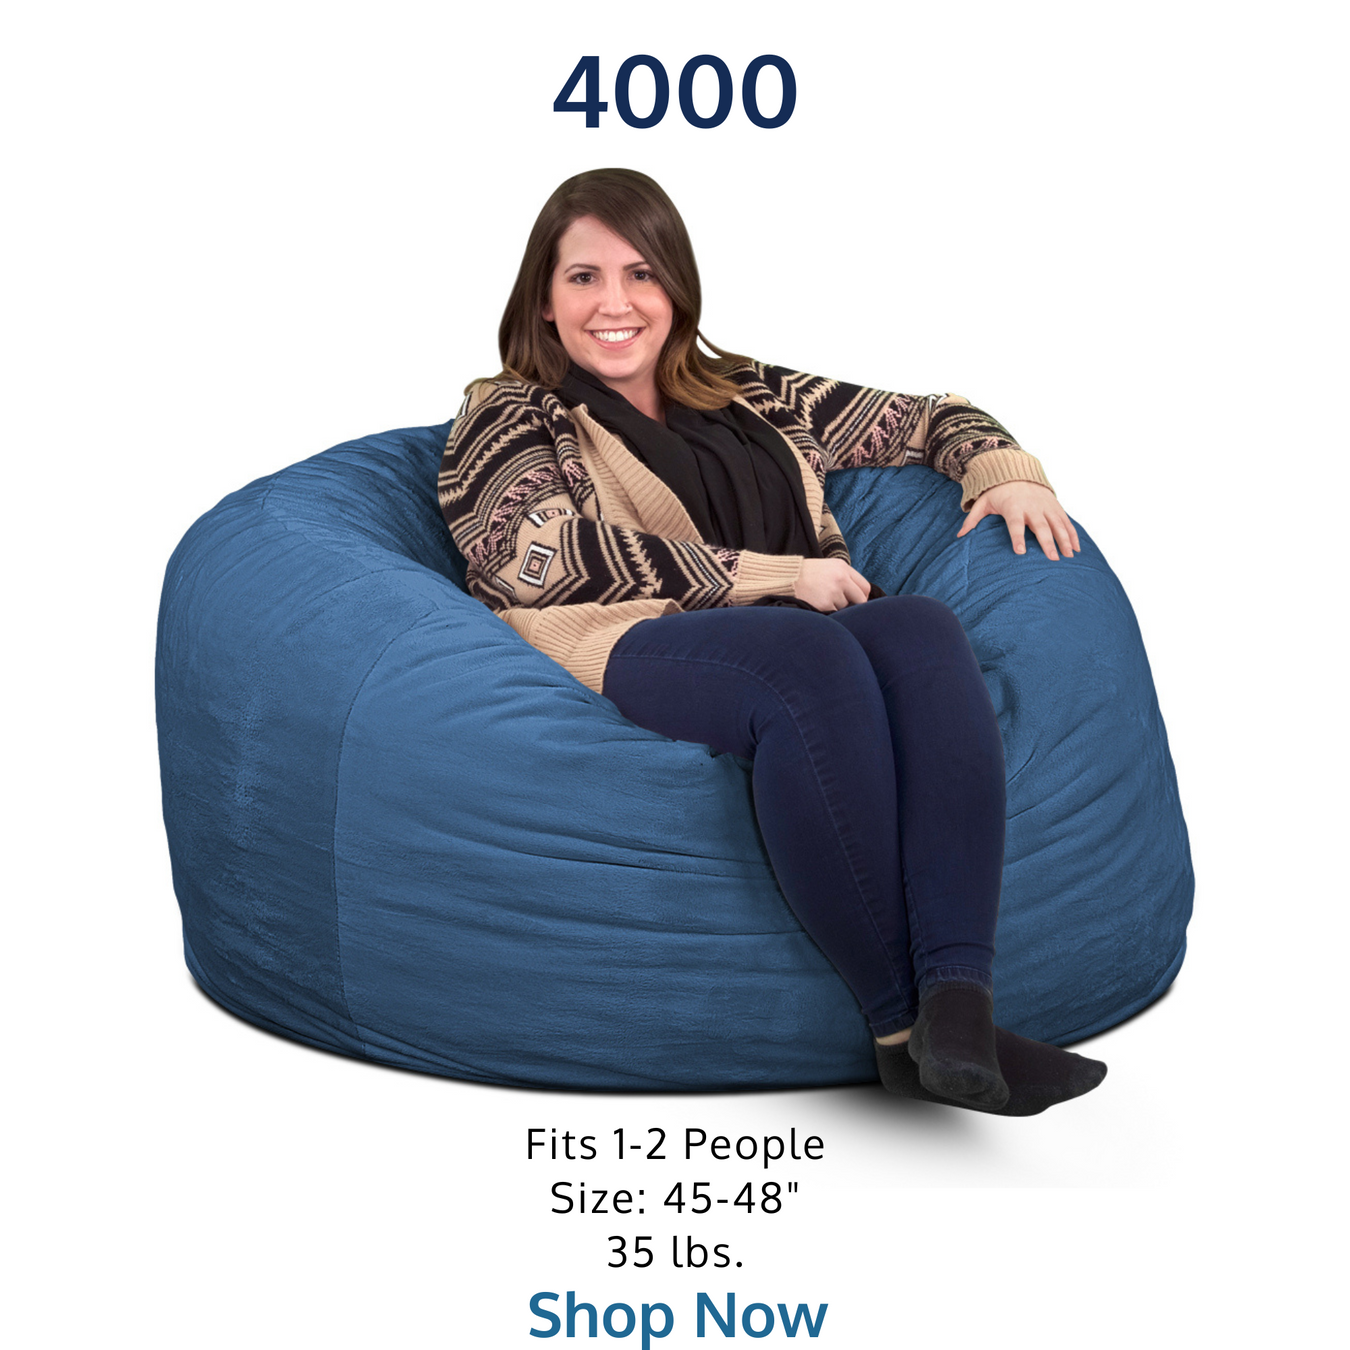 ultimate sack 4000 bean bag chair for Adults and Kids